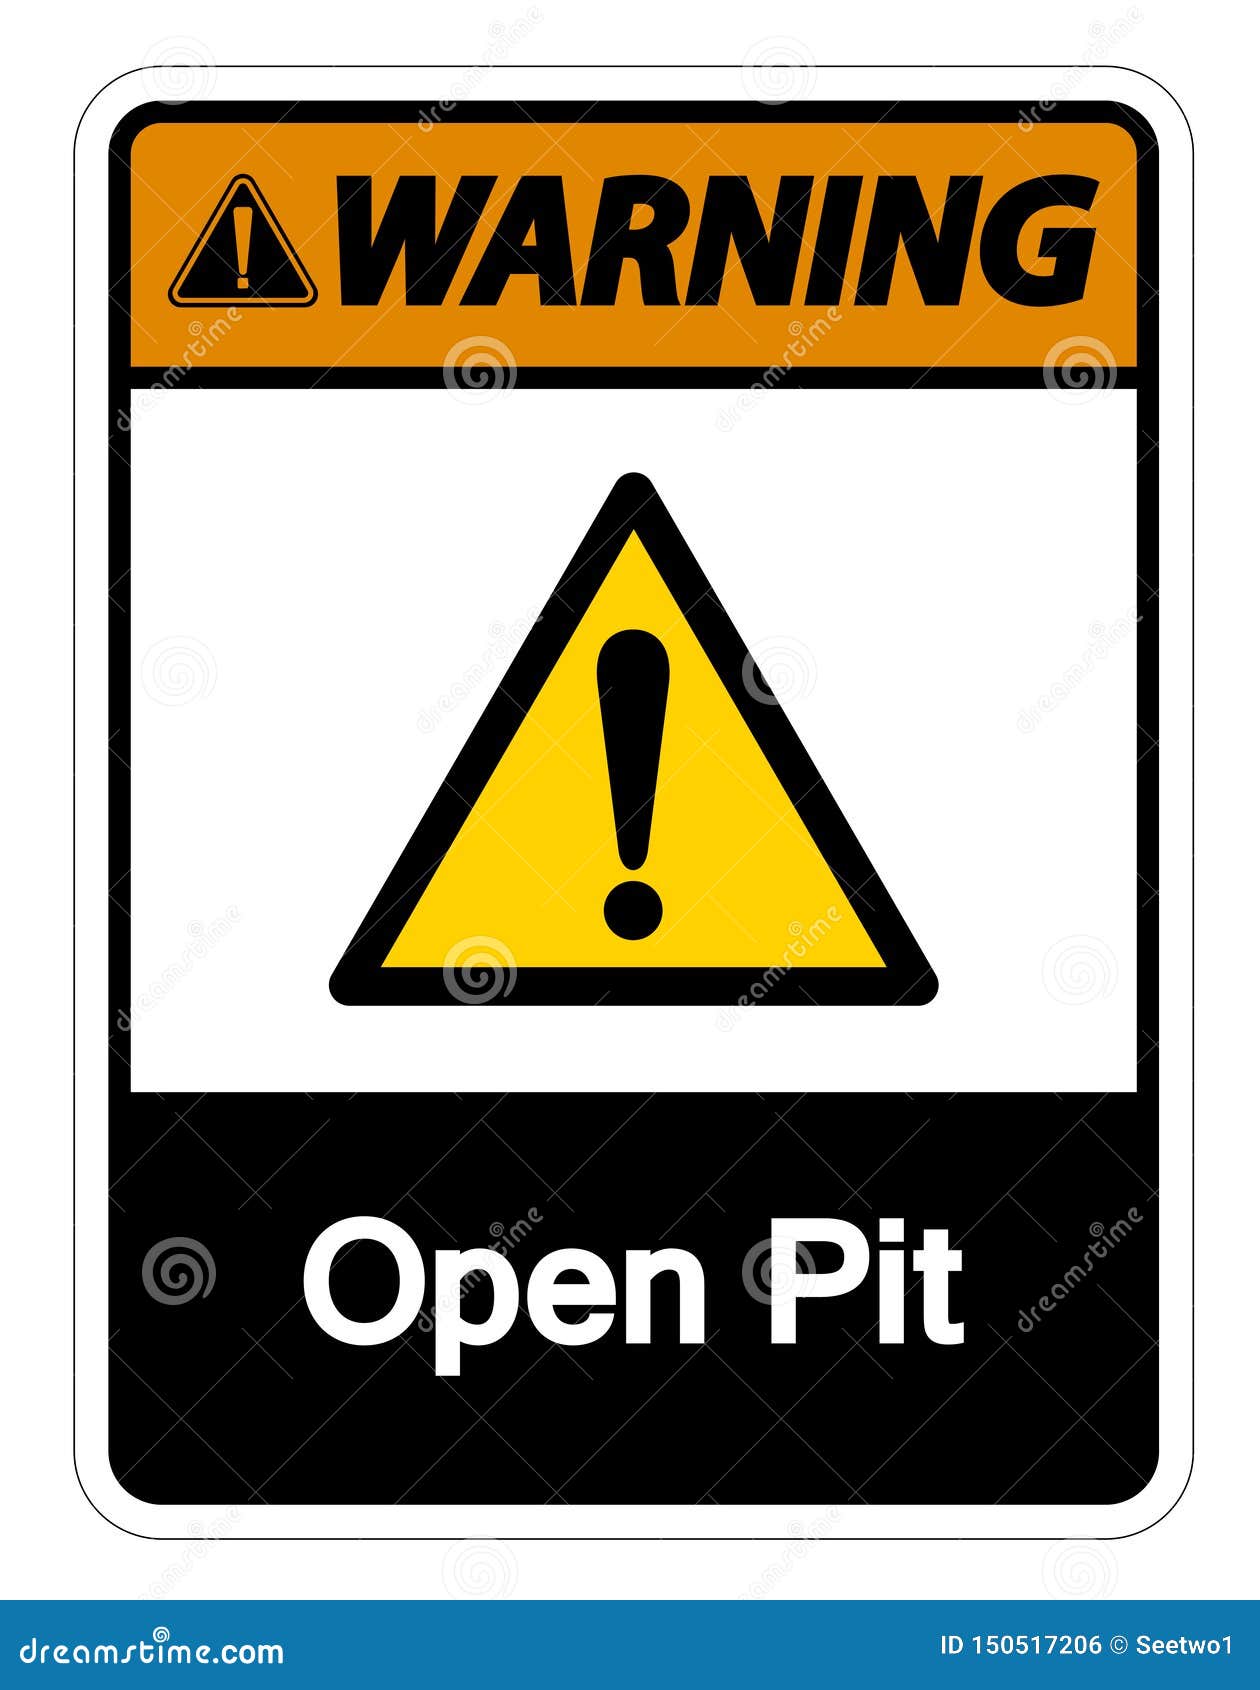 Warning Beware open pit safety sign 